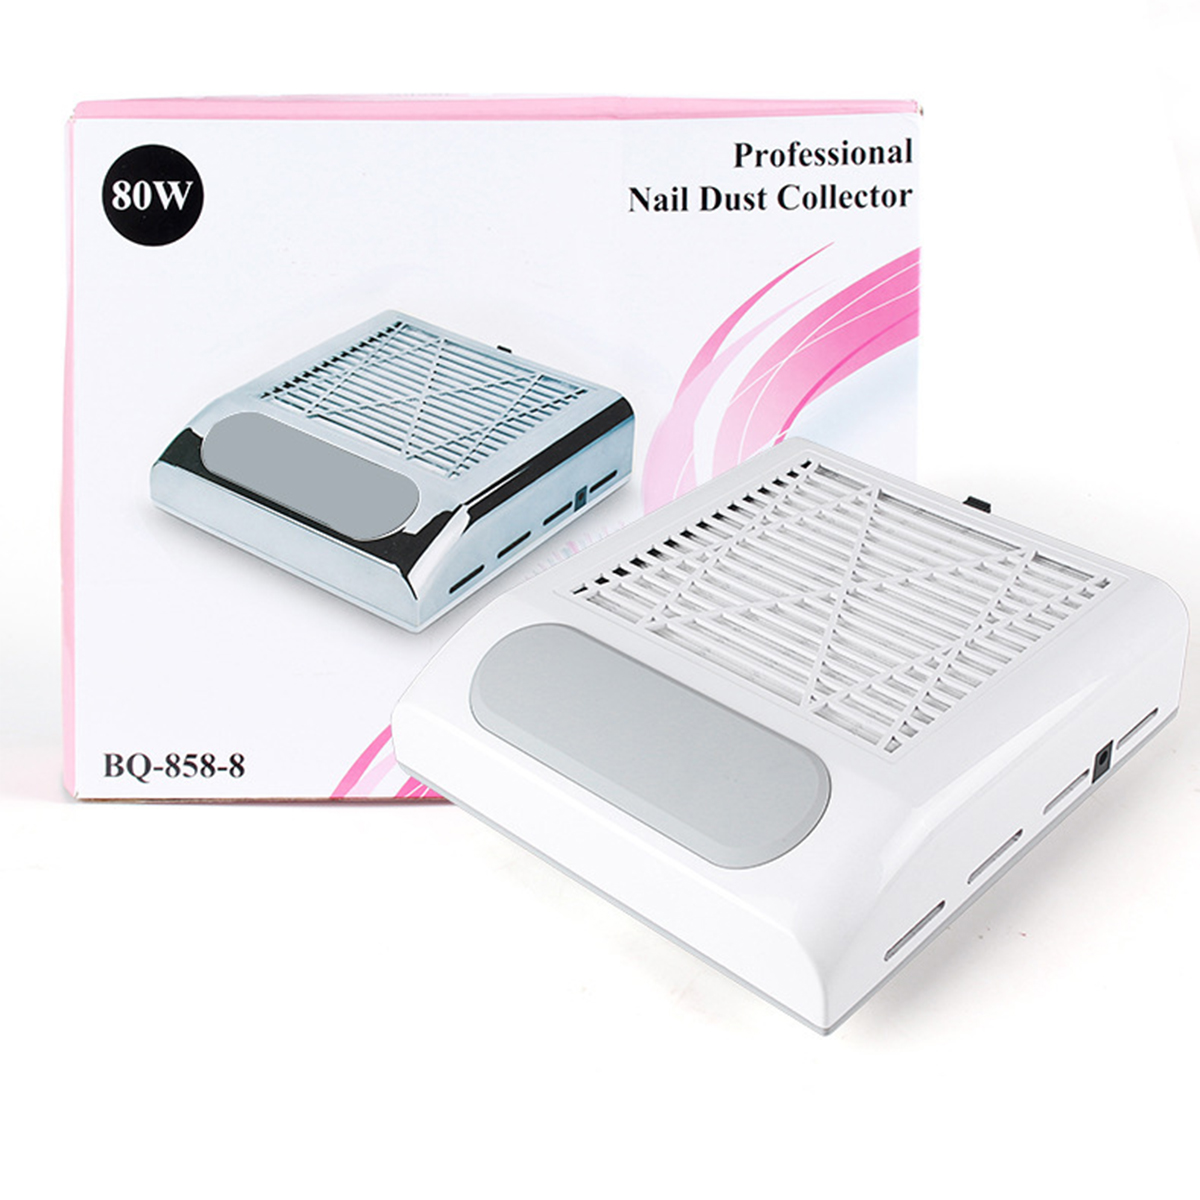 80W-Nail-Dust-Suction-Collector-Fan-Vacuum-Cleaner-Manicure-Machine-Tools-Nail-Dust-Collector-Nail-G-1940078-8